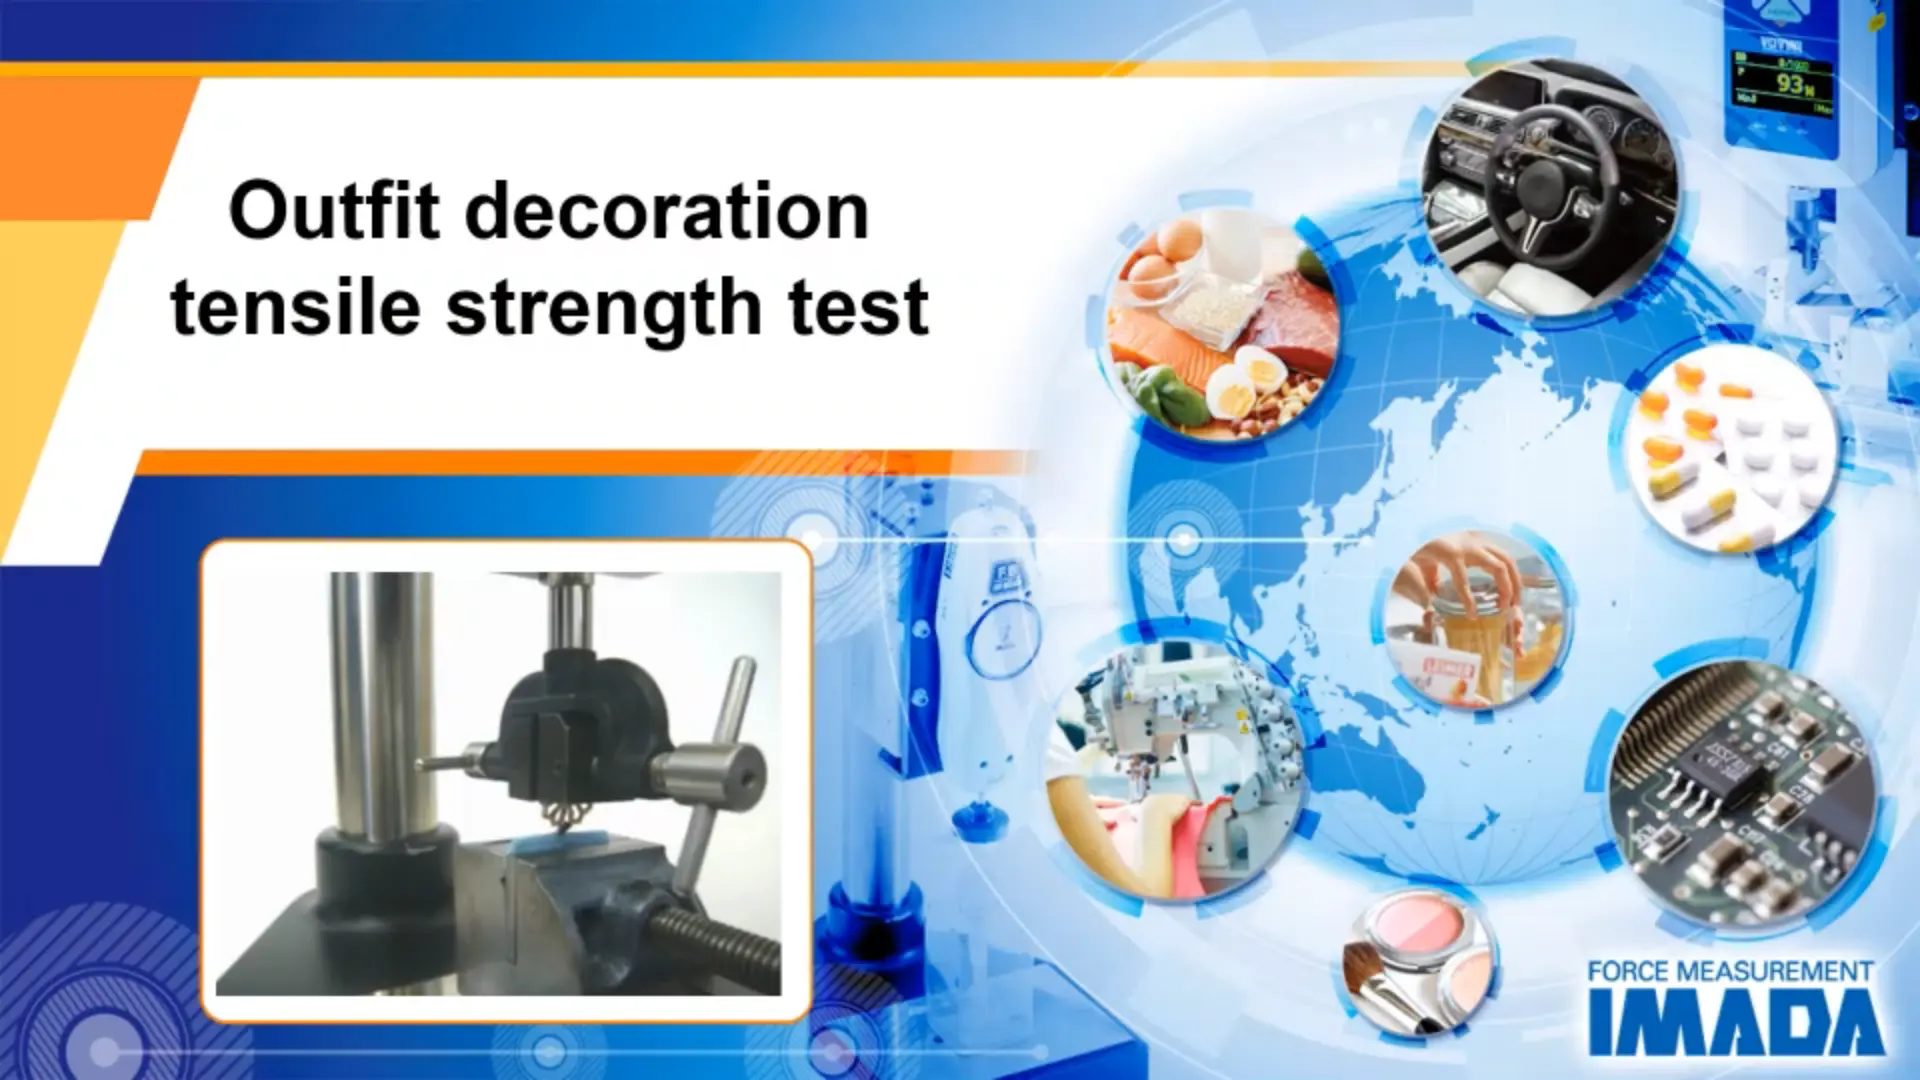 Sewed decoration tension strength test